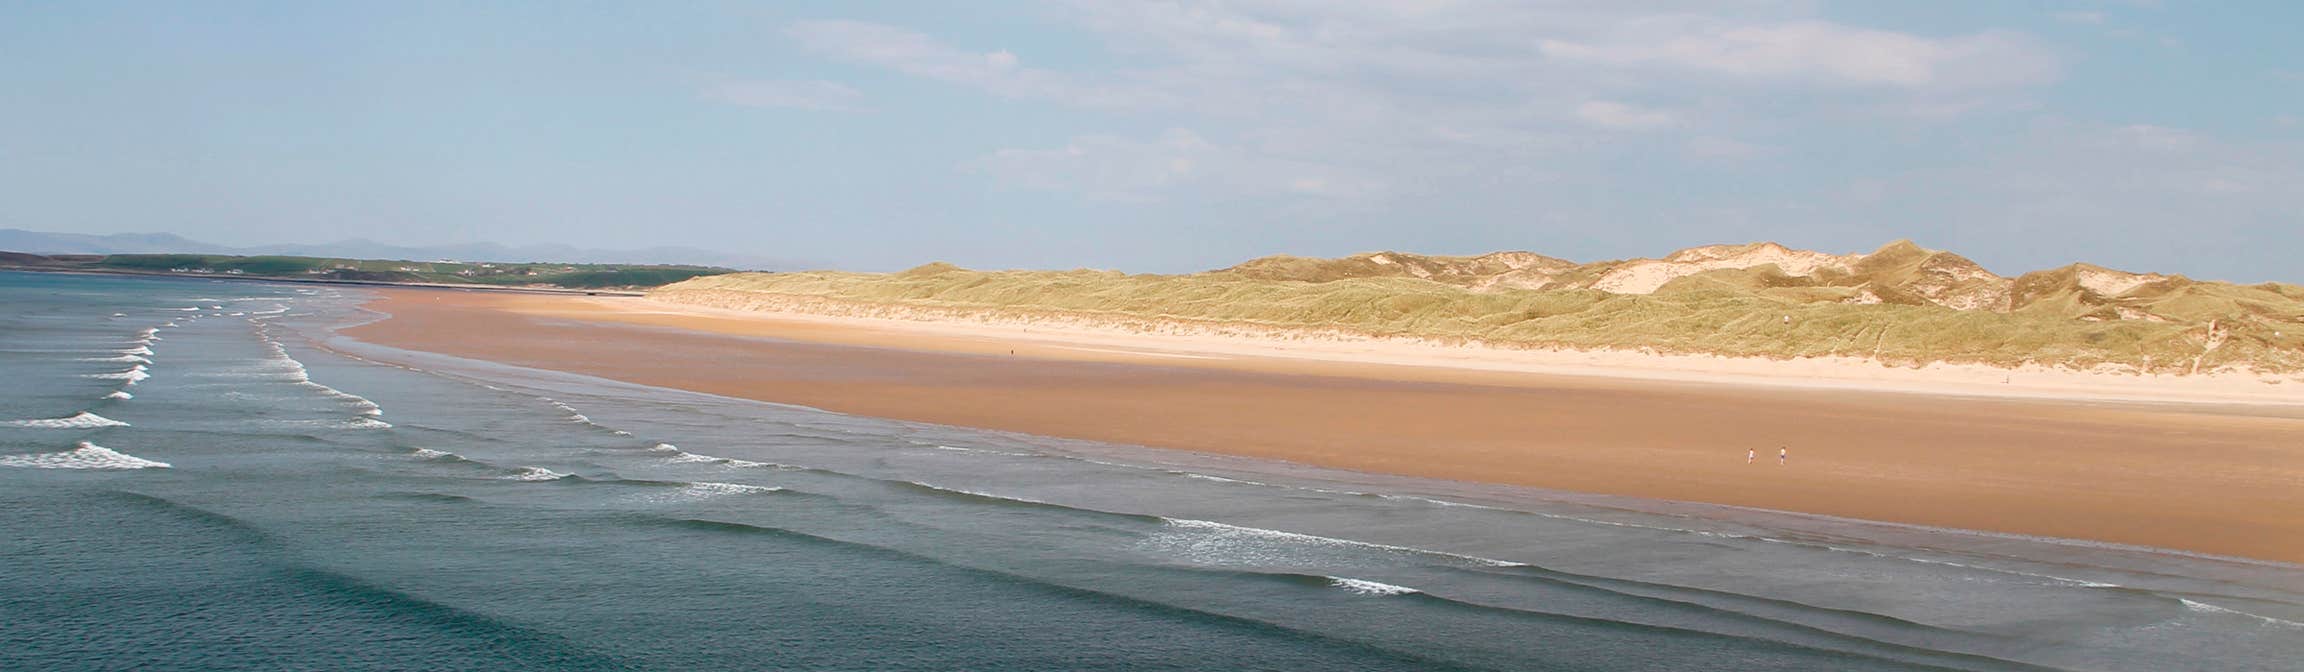 Image of Tullan Strand on a sunny day, Bundoran, County Donegal